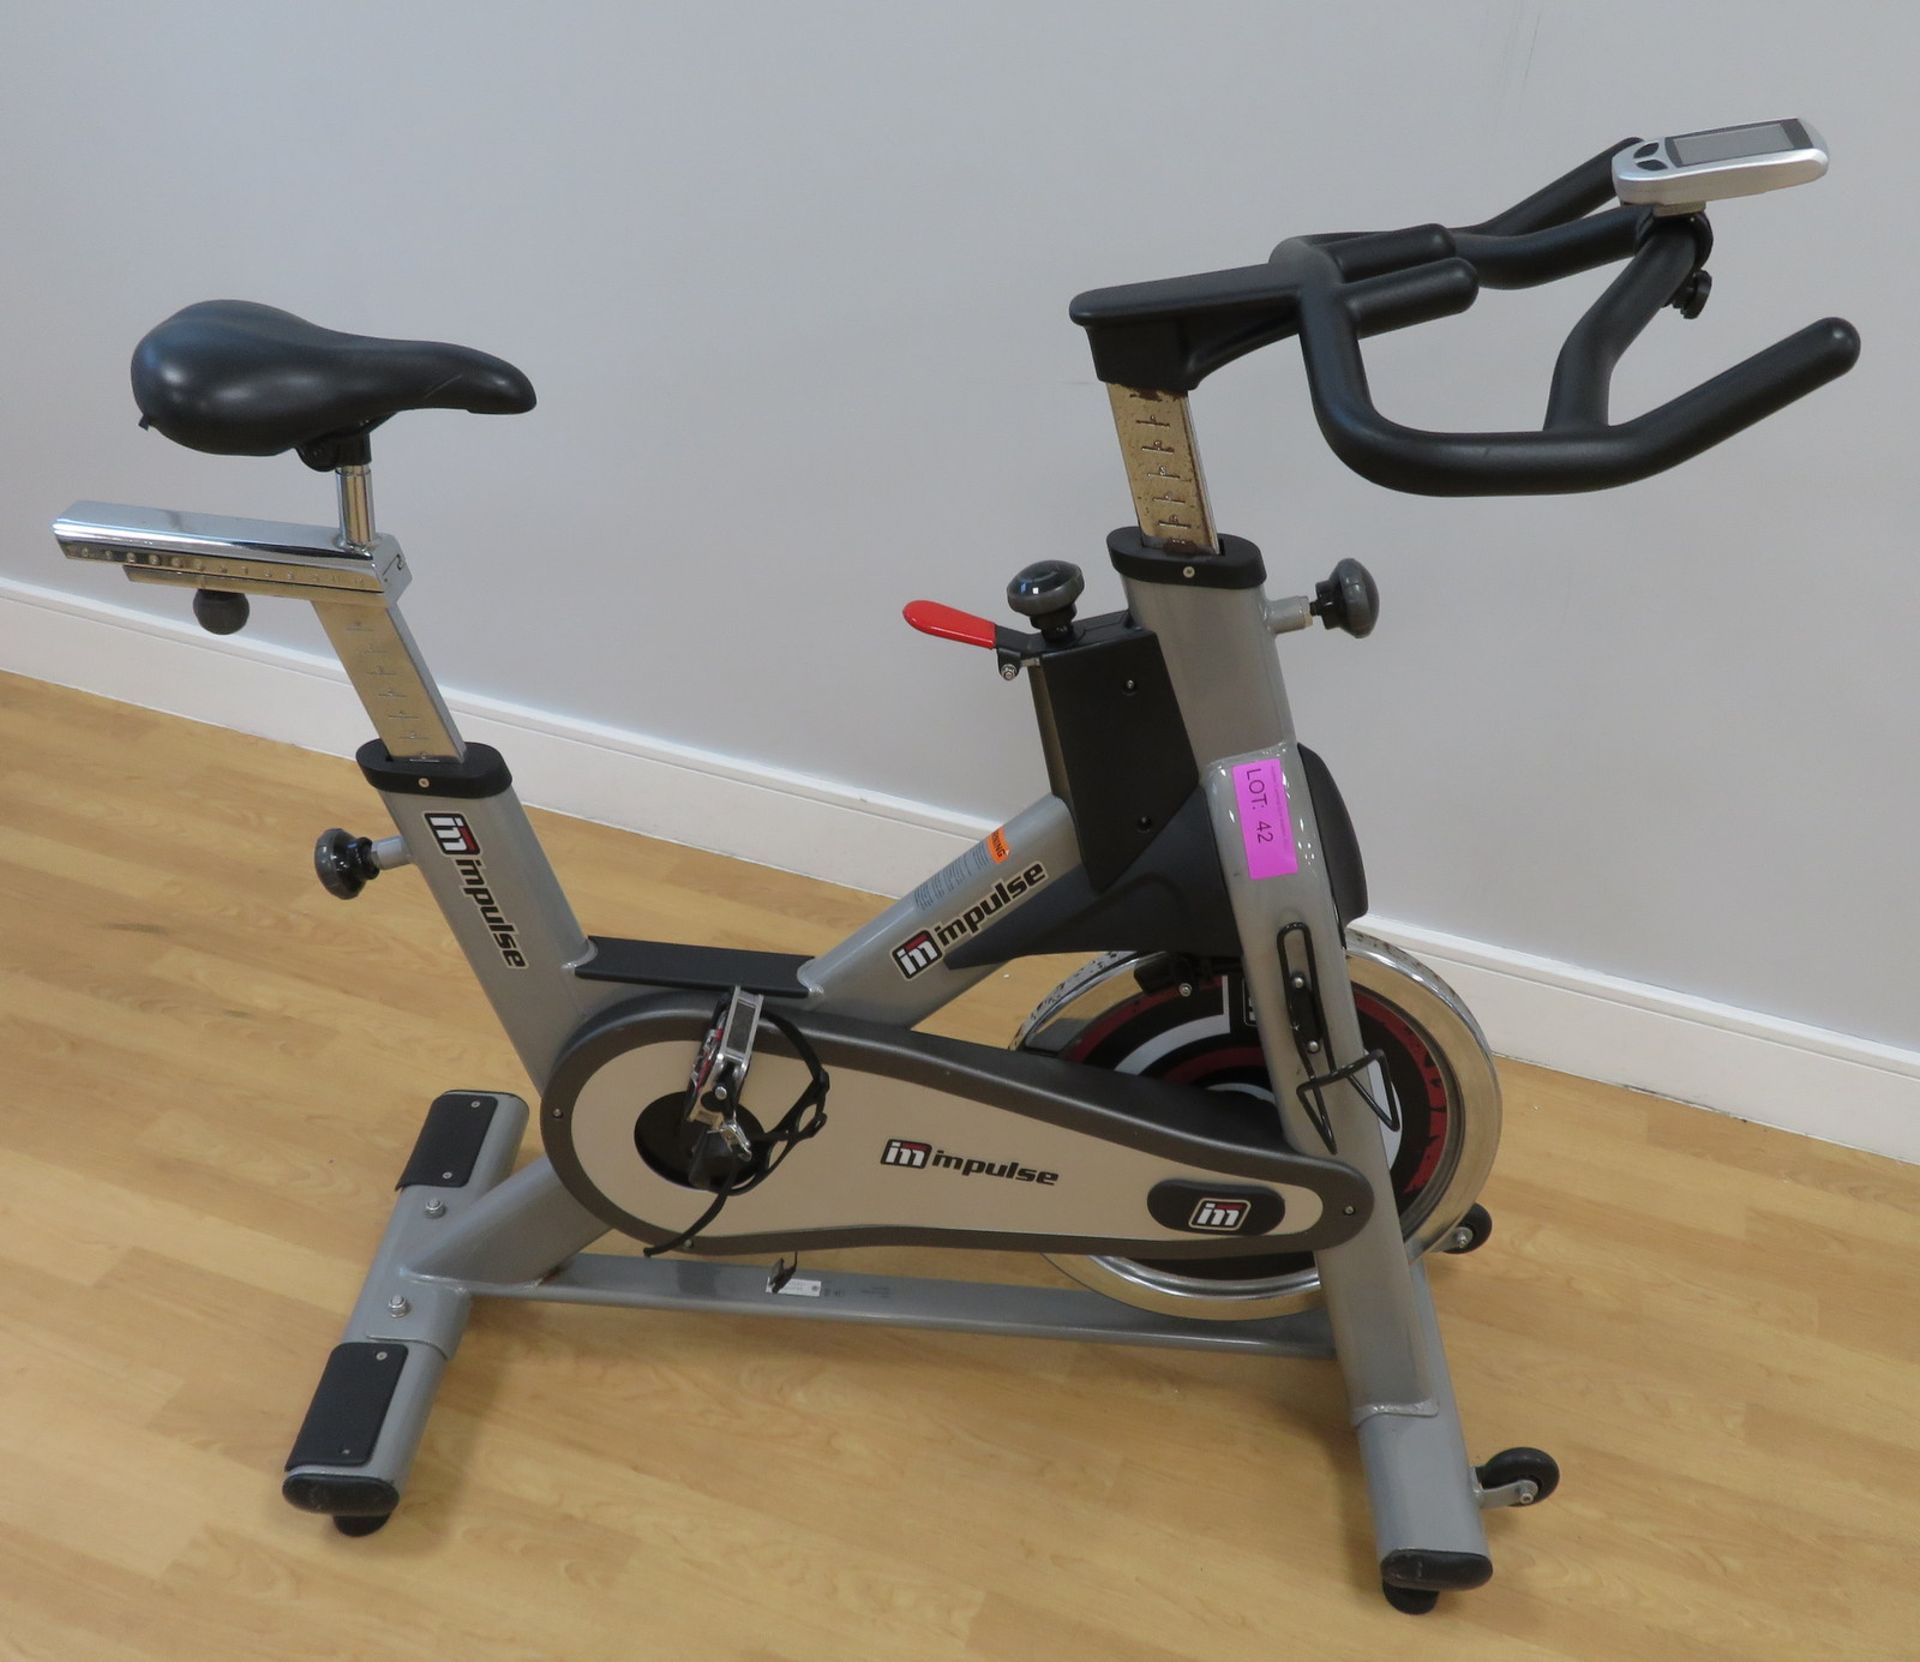 Impulse Model: PS300D Spin Bike With Digital Console. Adjustable Seat & Handle Bars. - Image 2 of 12